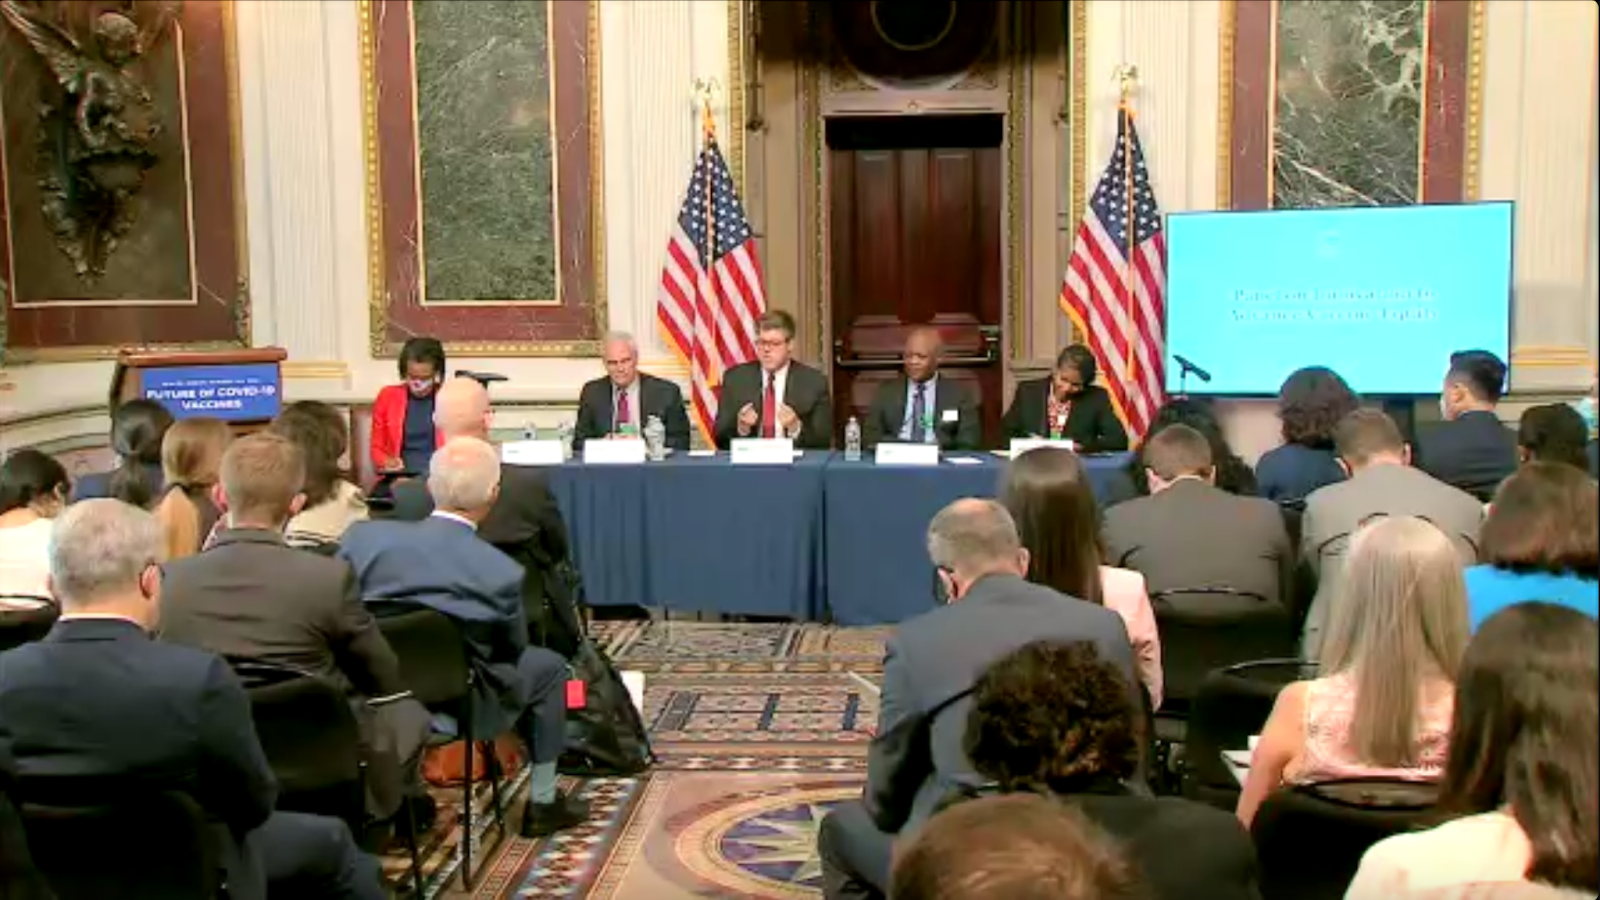 Kody Kinsley (center), Secretary of the N.C. Department of Health & Human Services, speaks at the White House on July 26 during a panel on advancing vaccine equity. He was joined by three other panelists.